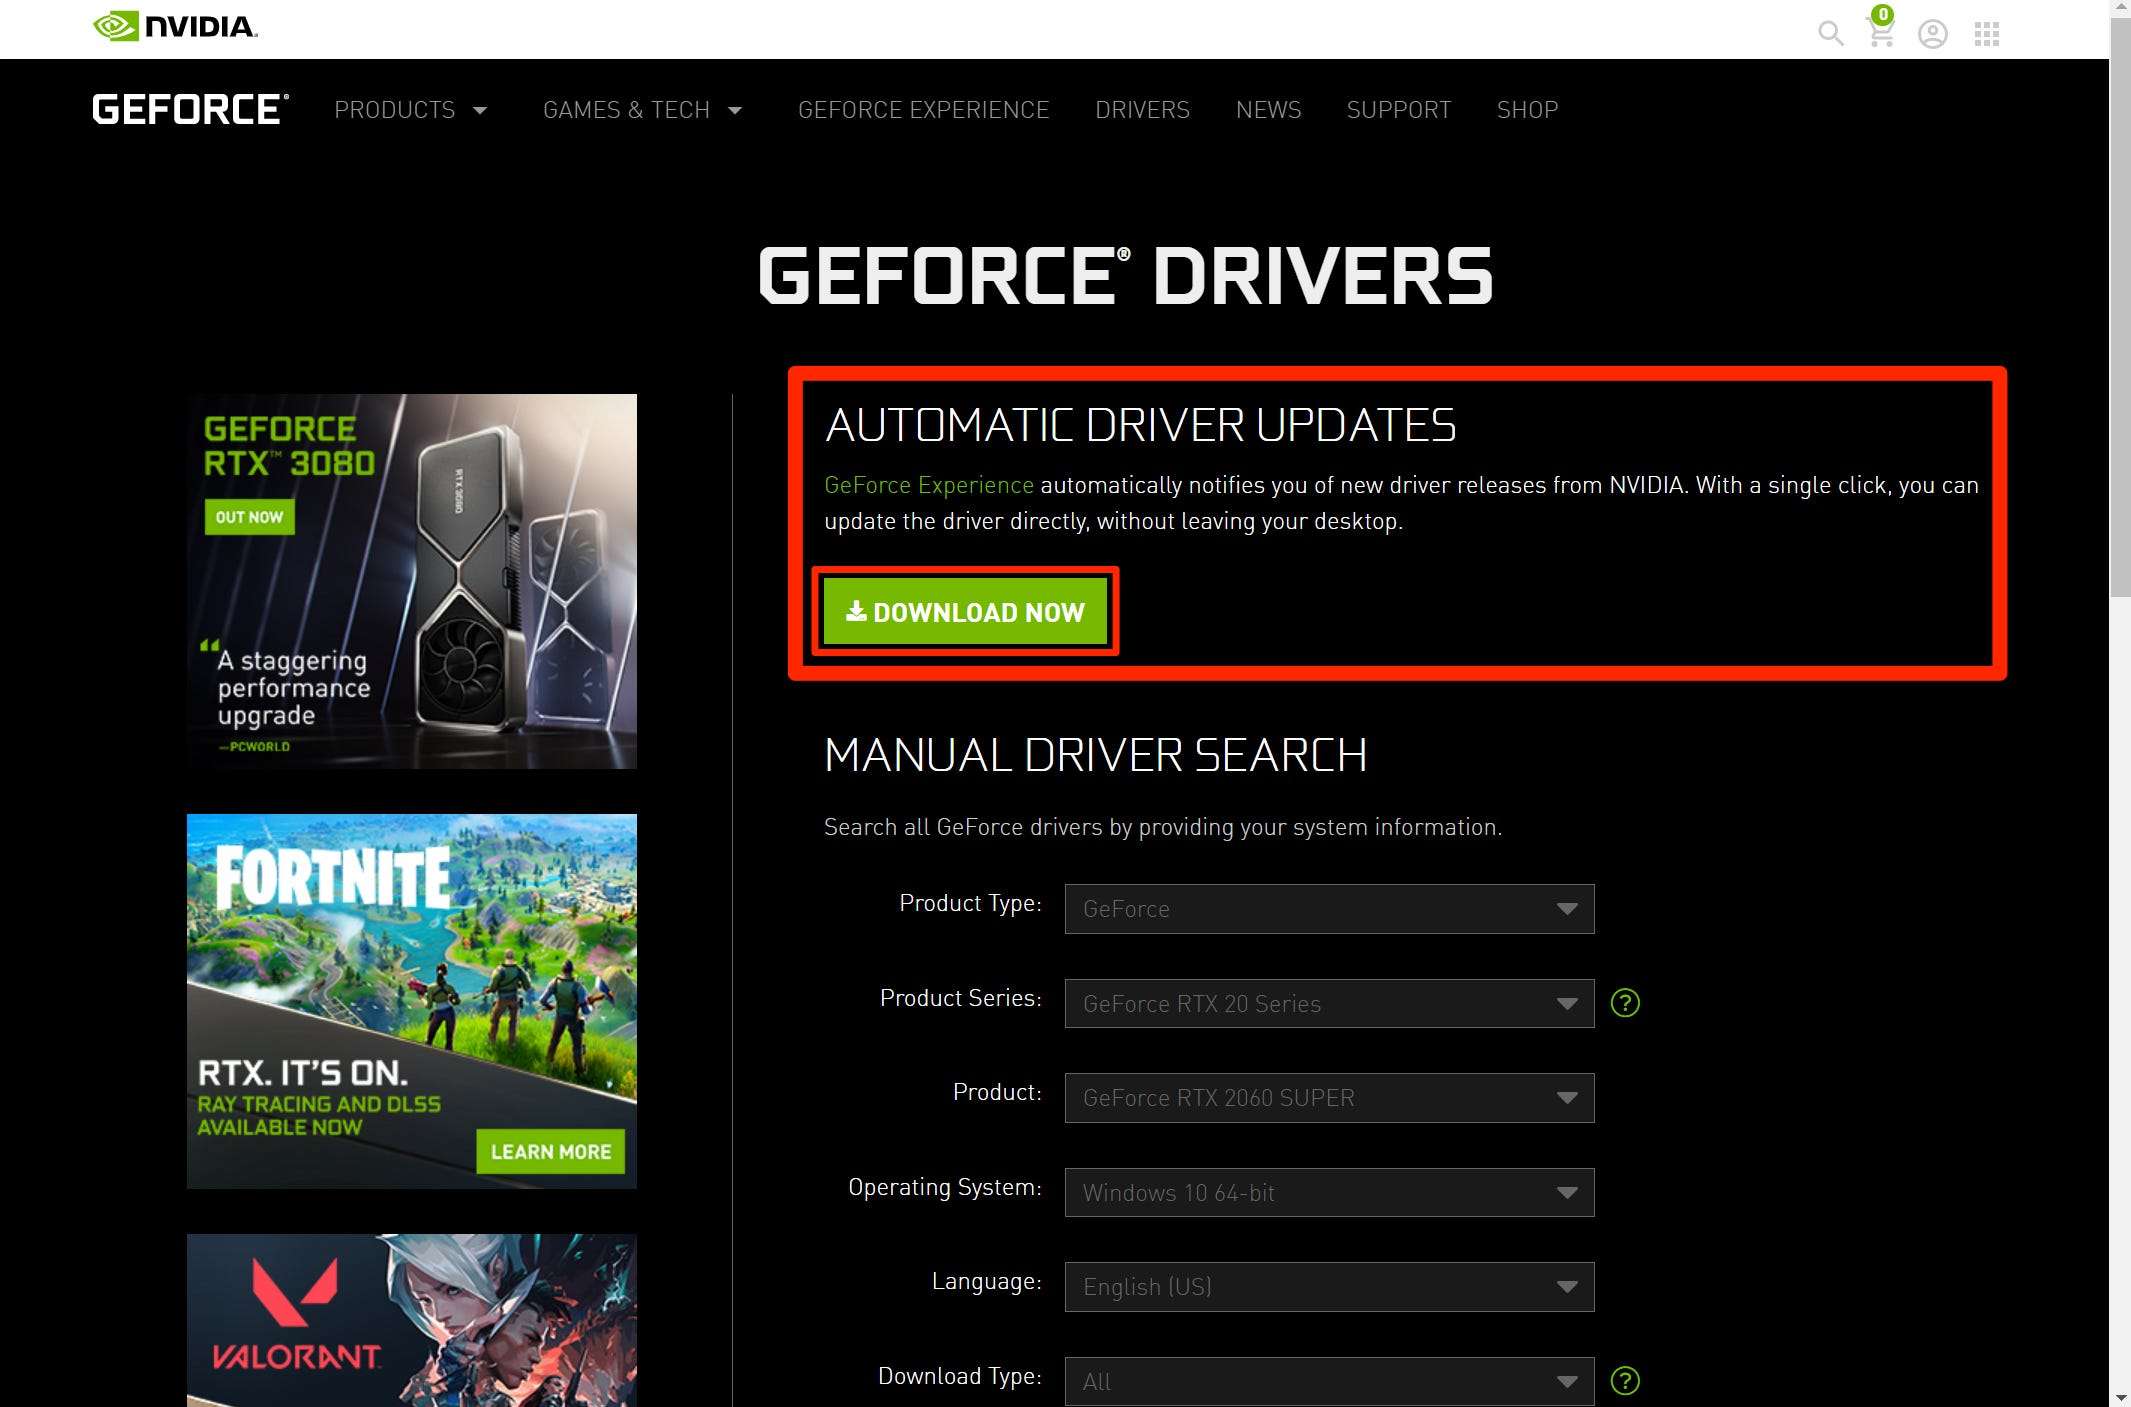 download latest driver for my graphics card